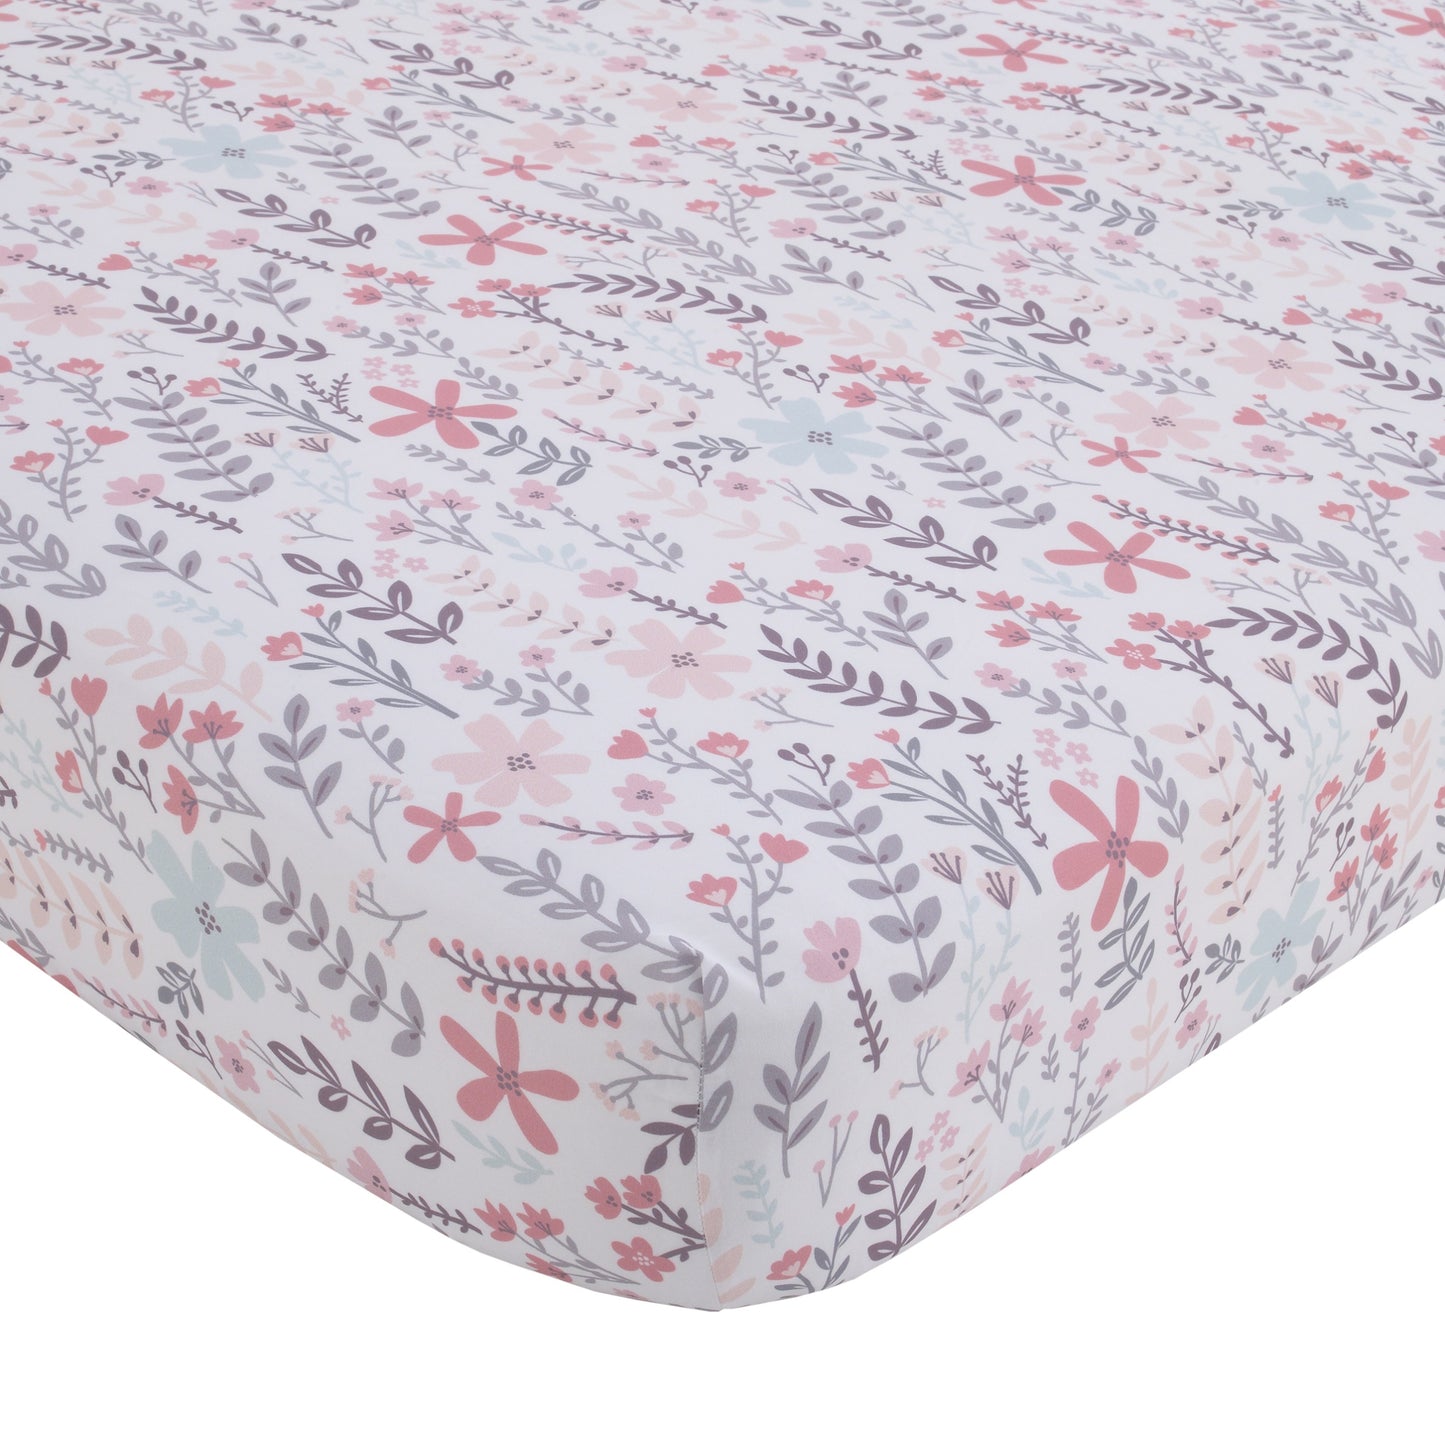 Little Love by NoJo Desert Flower - Feathers and Ferns Pink, Grey and Aqua Fitted Crib Sheet